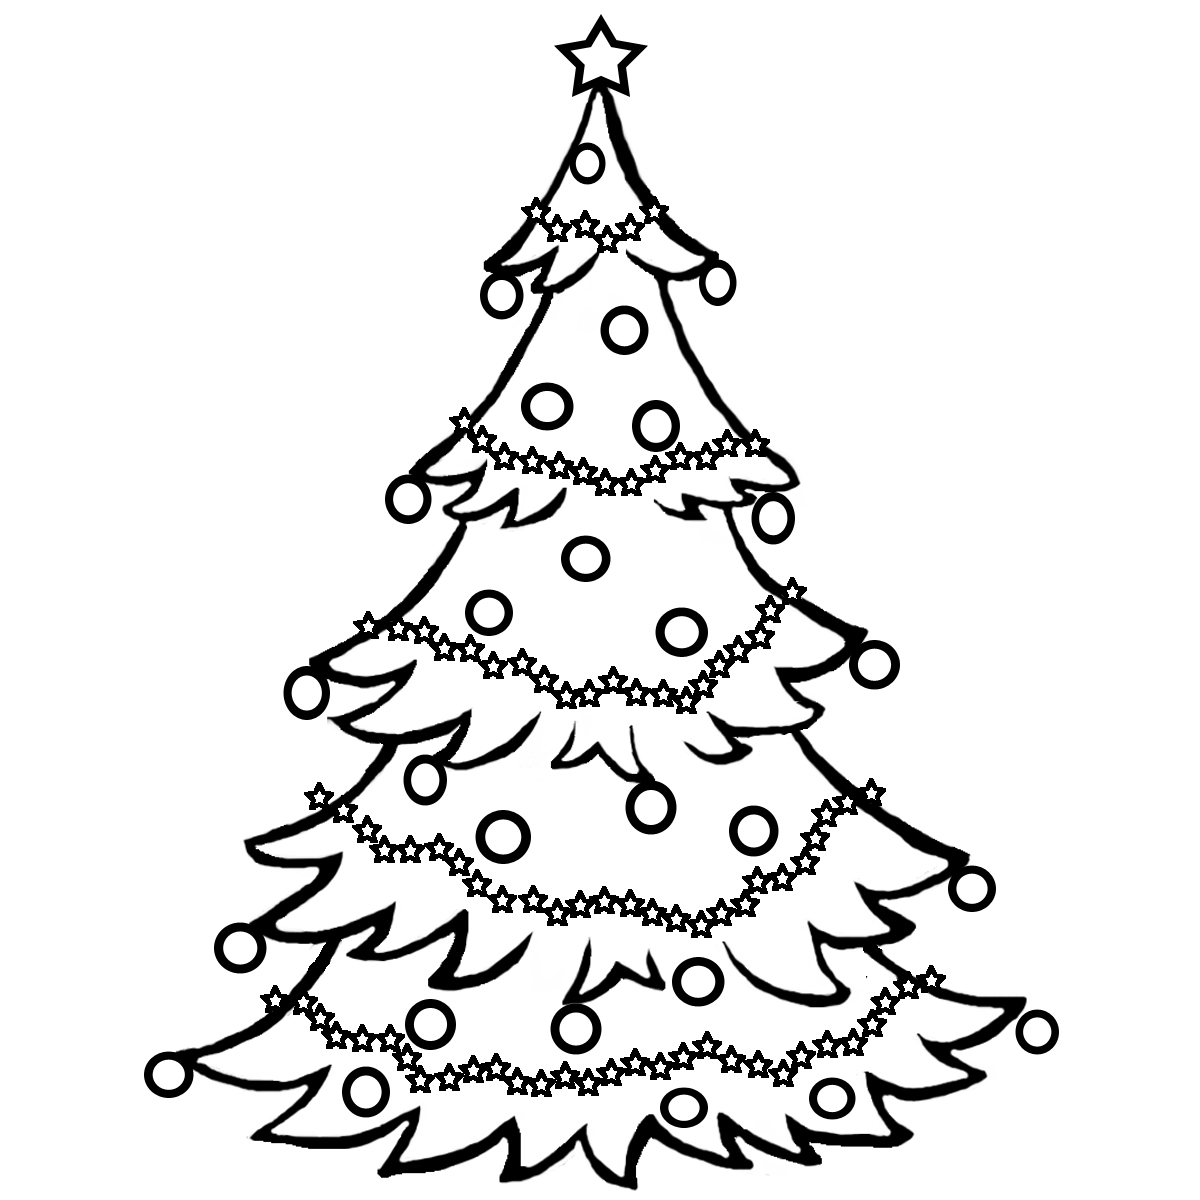 Maple tree coloring page - Coloring Pages & Pictures - IMAGIXS